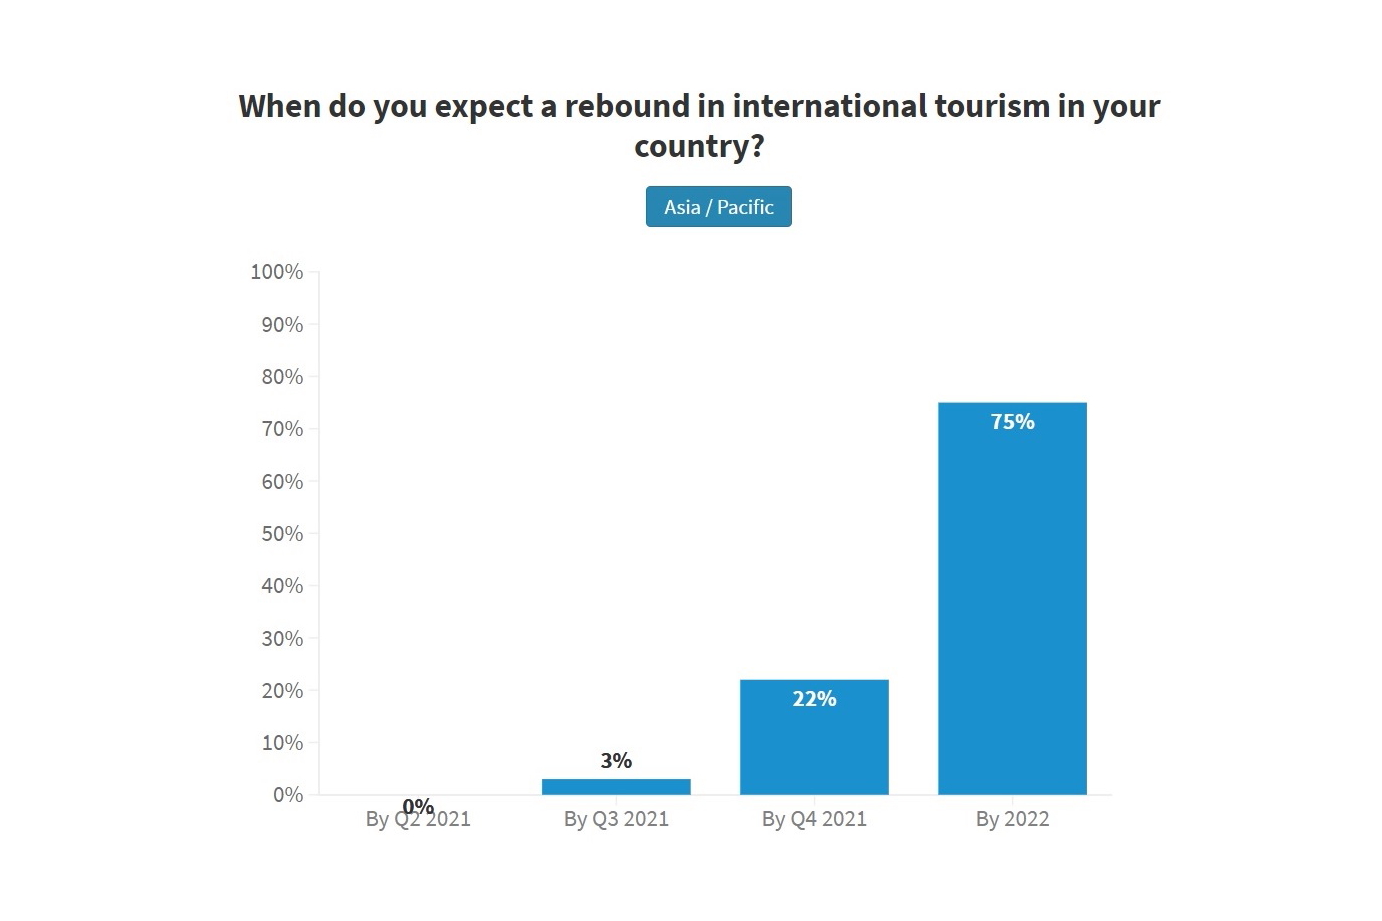 When does the UNWTO Panel of Tourism Experts expect a rebound in international tourism in Asia Pacific?